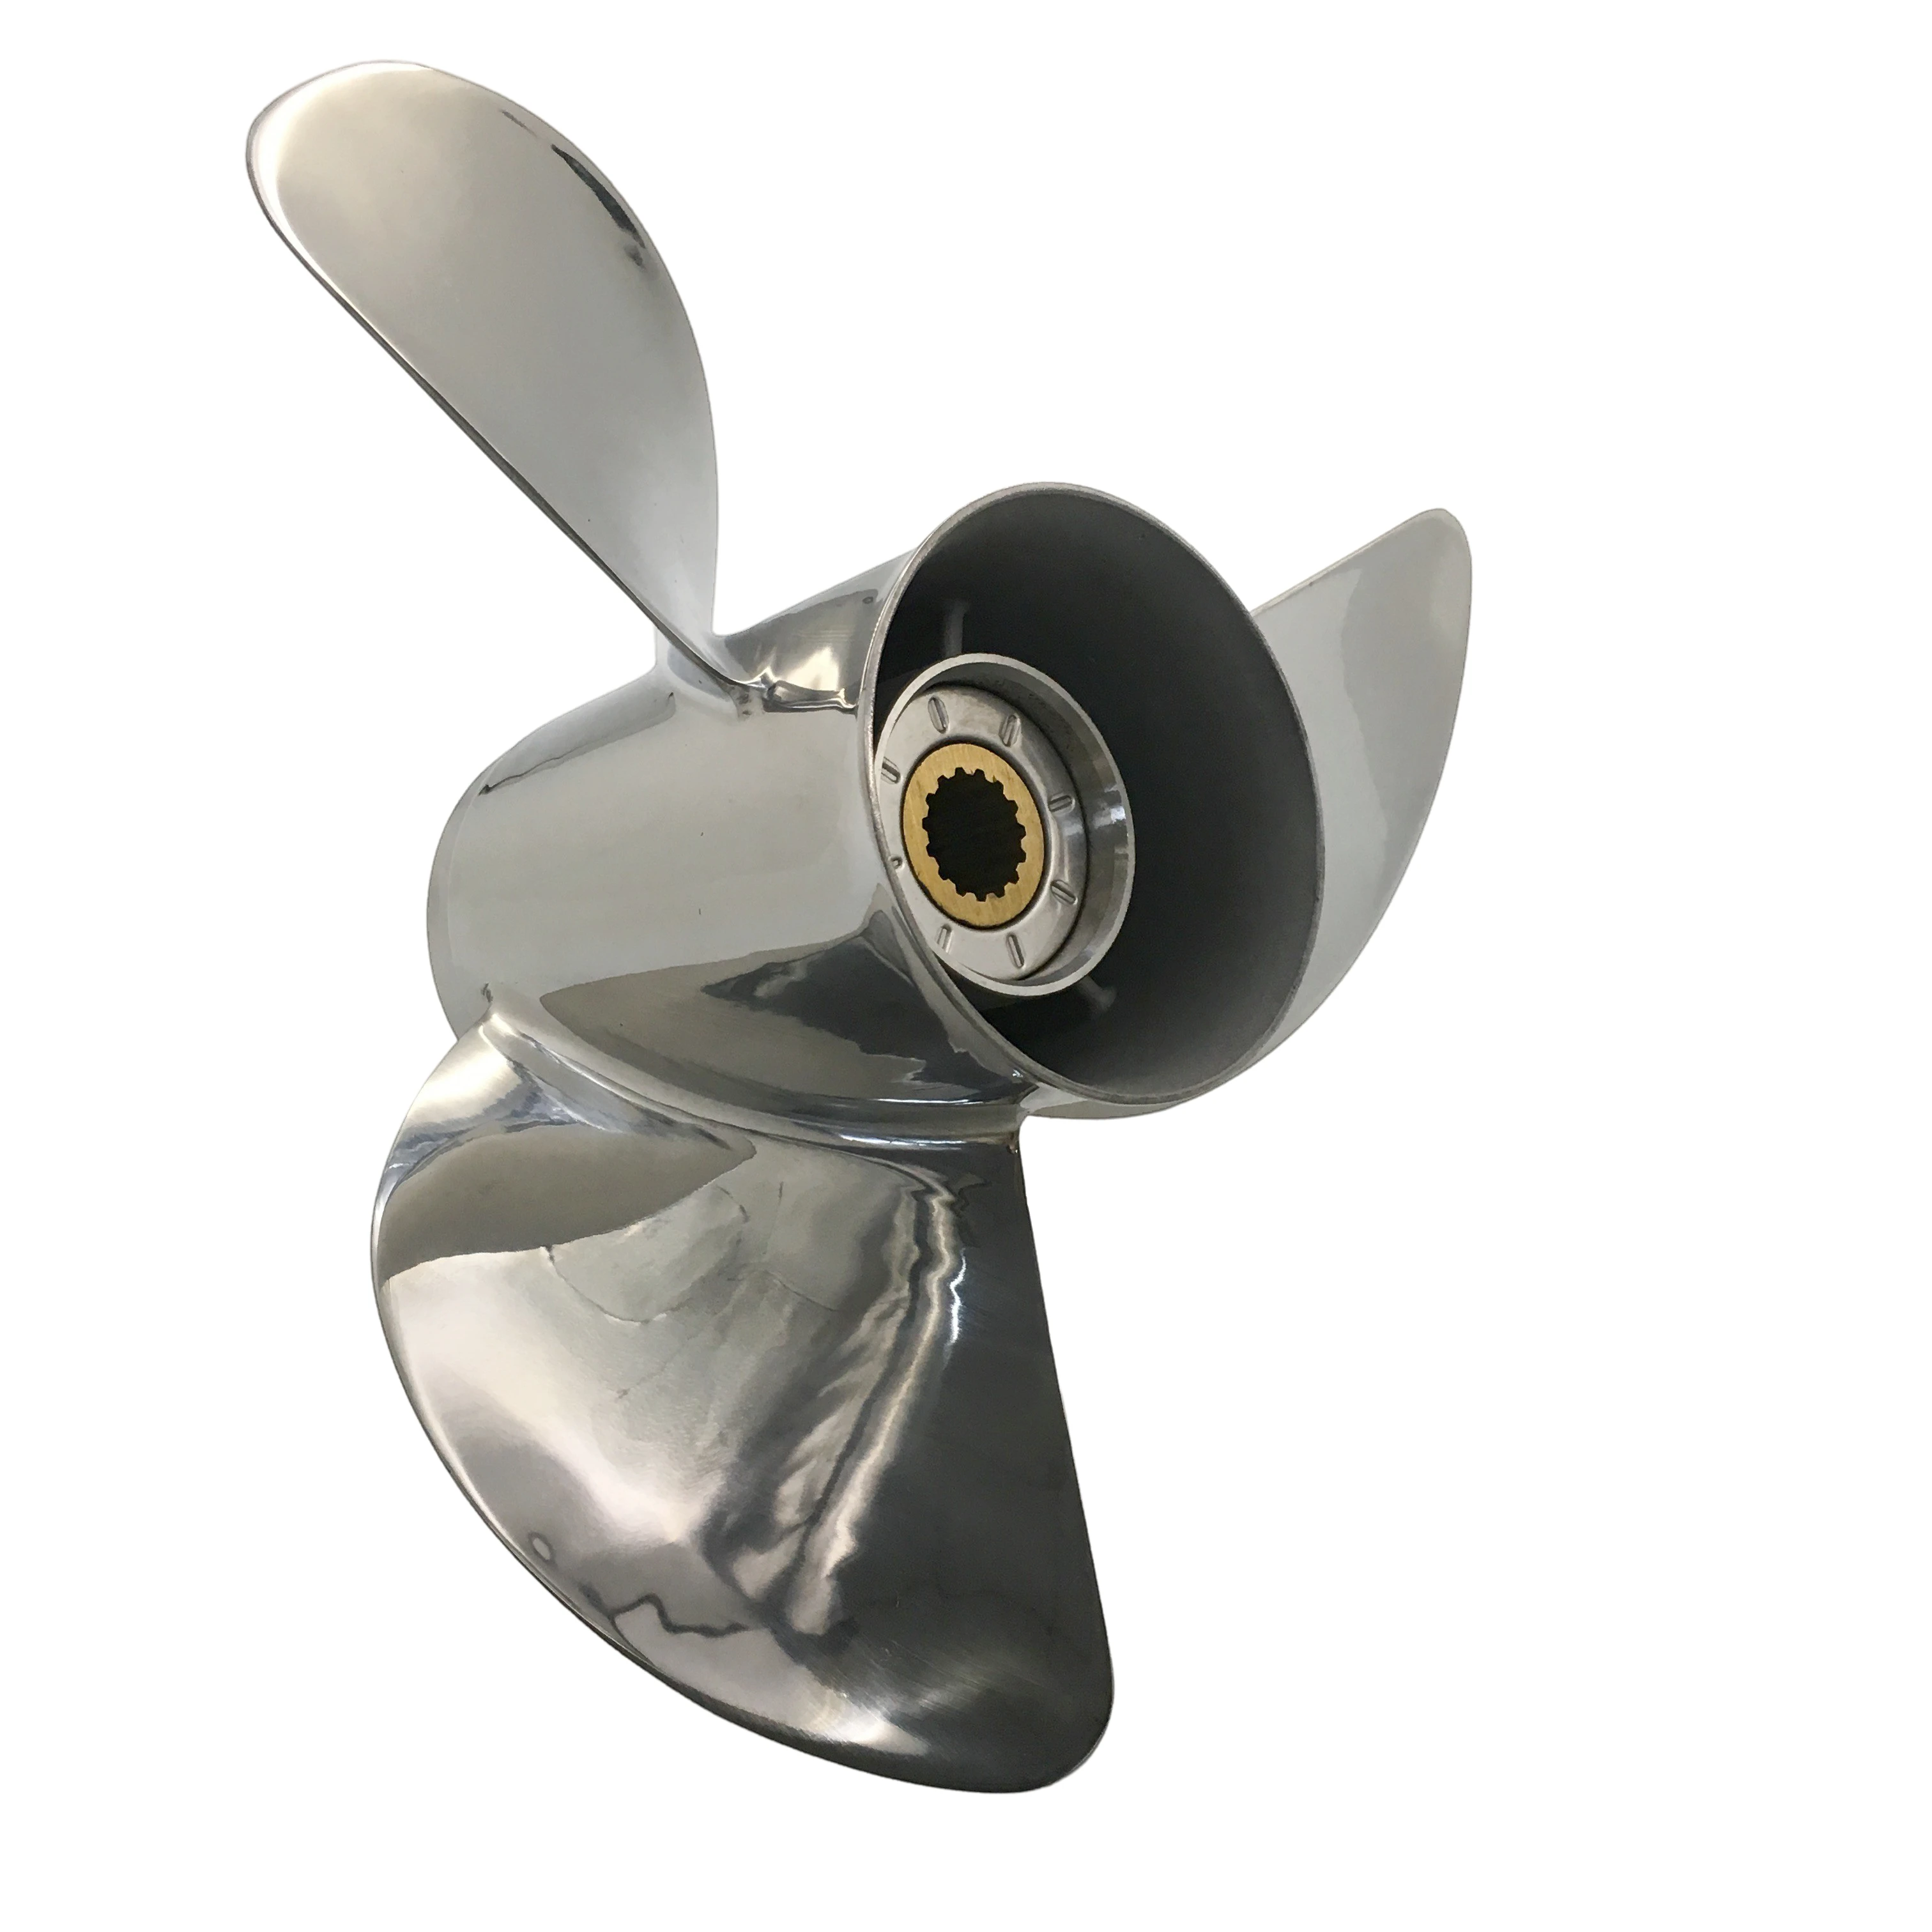 Propeller 13 3/4x15 Mercury Outboard 60HP-125HP 3 Blades Stainless Steel Prop SS 15 Tooth OEM NO: 48-77342A45 13.75x15